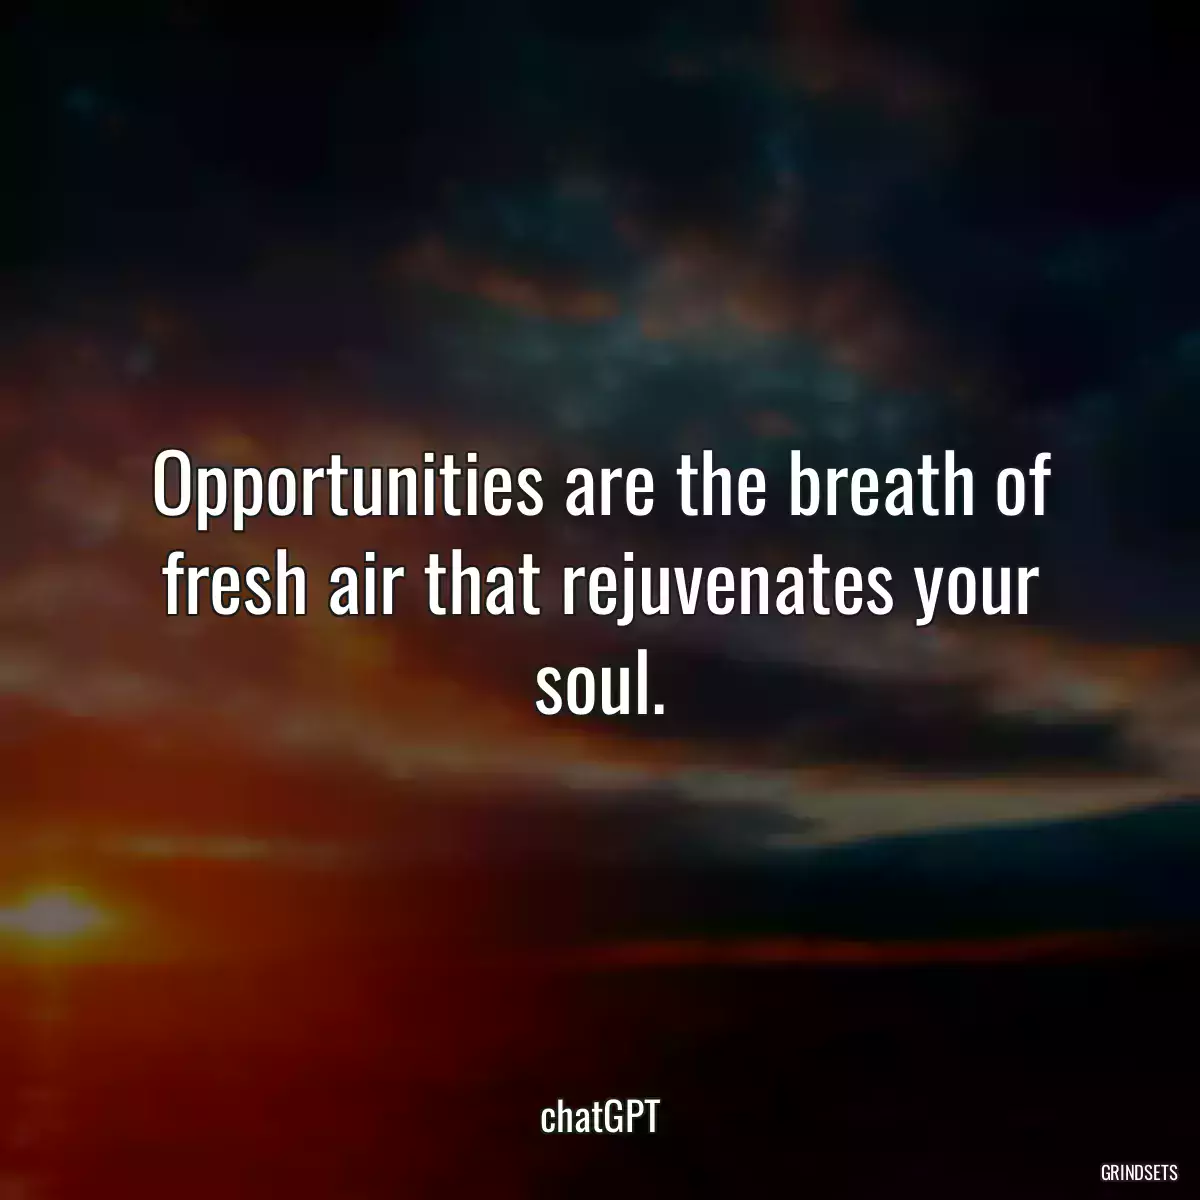 Opportunities are the breath of fresh air that rejuvenates your soul.